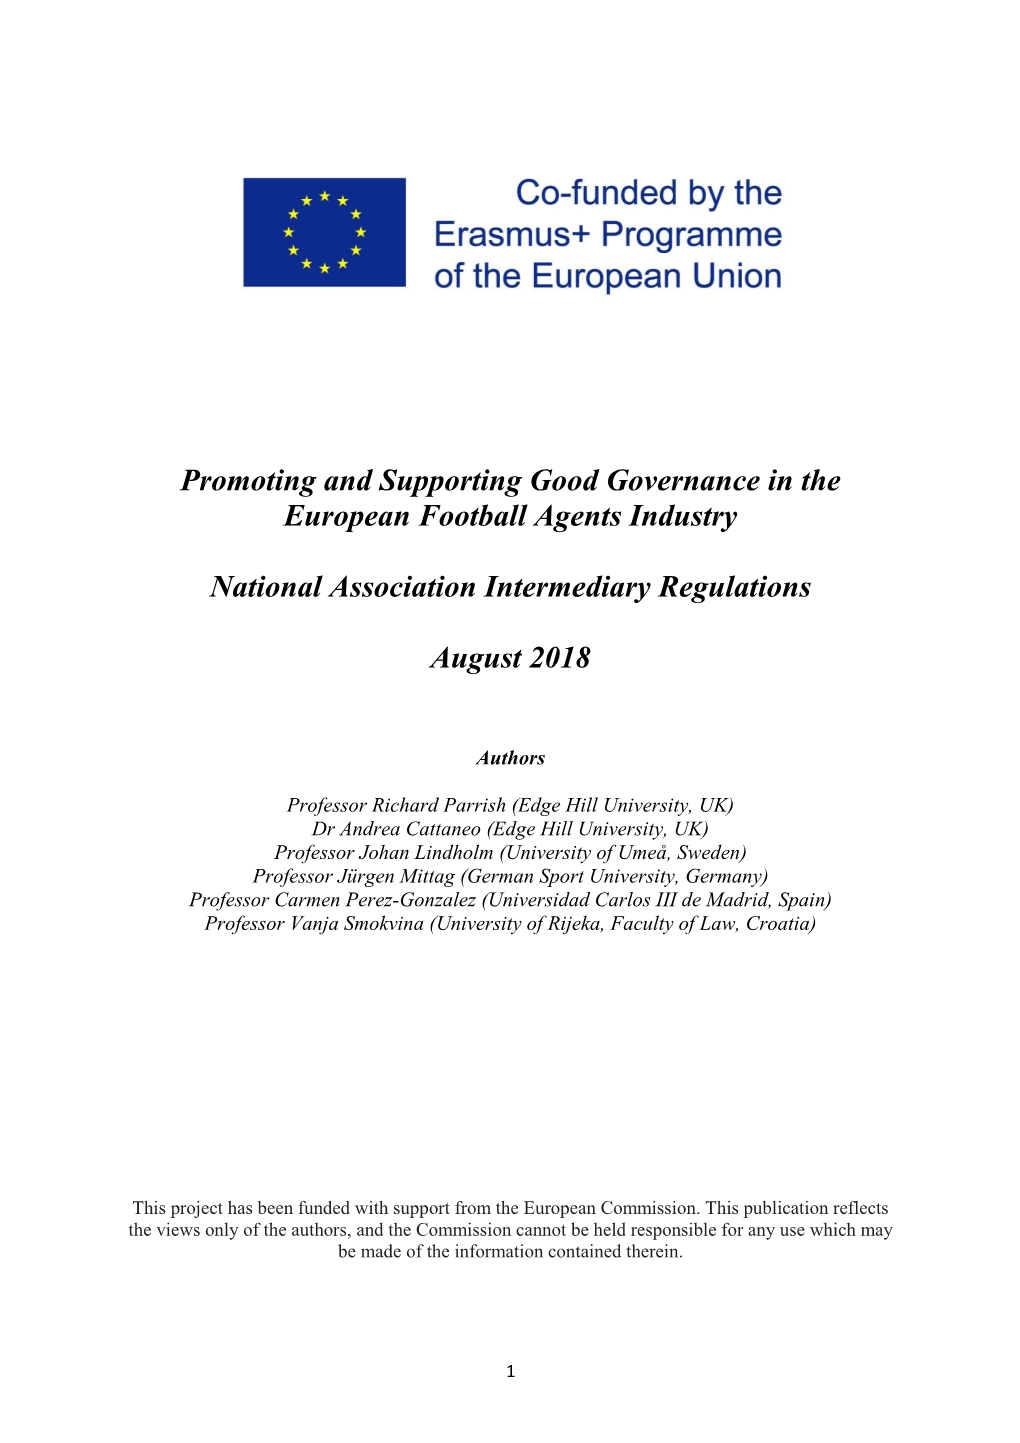 Promoting and Supporting Good Governance in the European Football Agents Industry National Association Intermediary Regulations